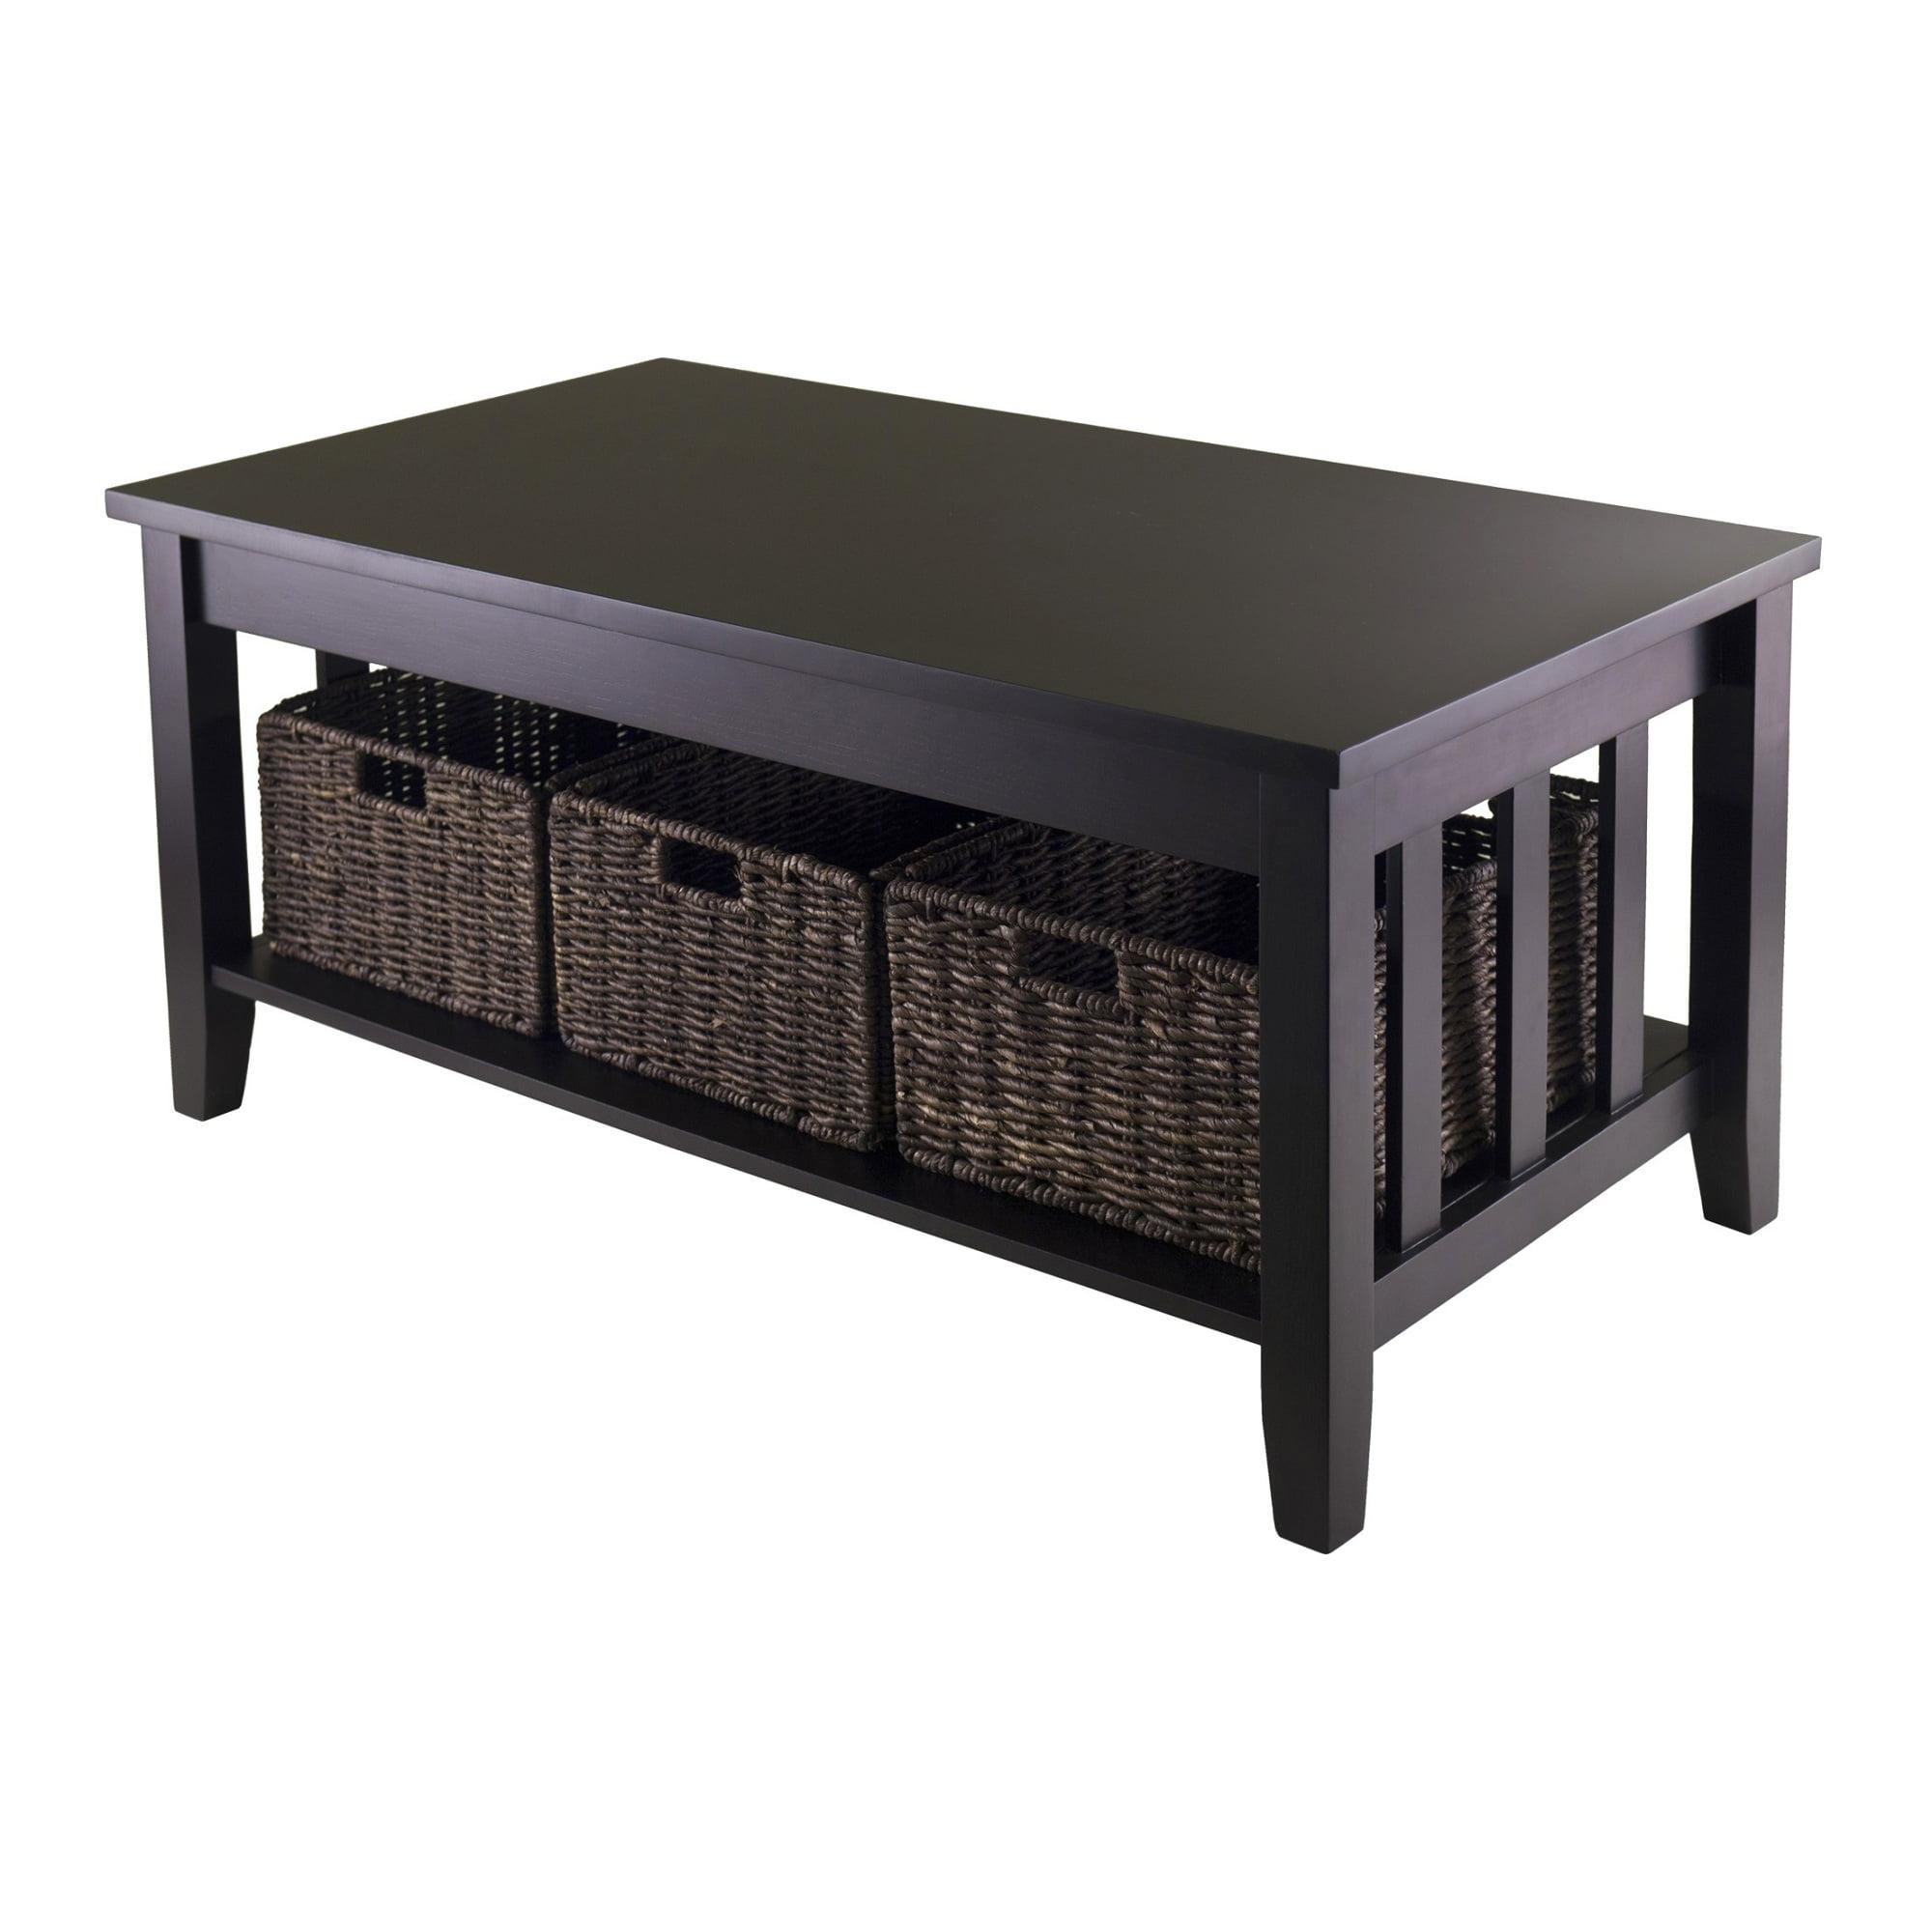 Espresso Rectangular 40" Coffee Table with Foldable Storage Baskets